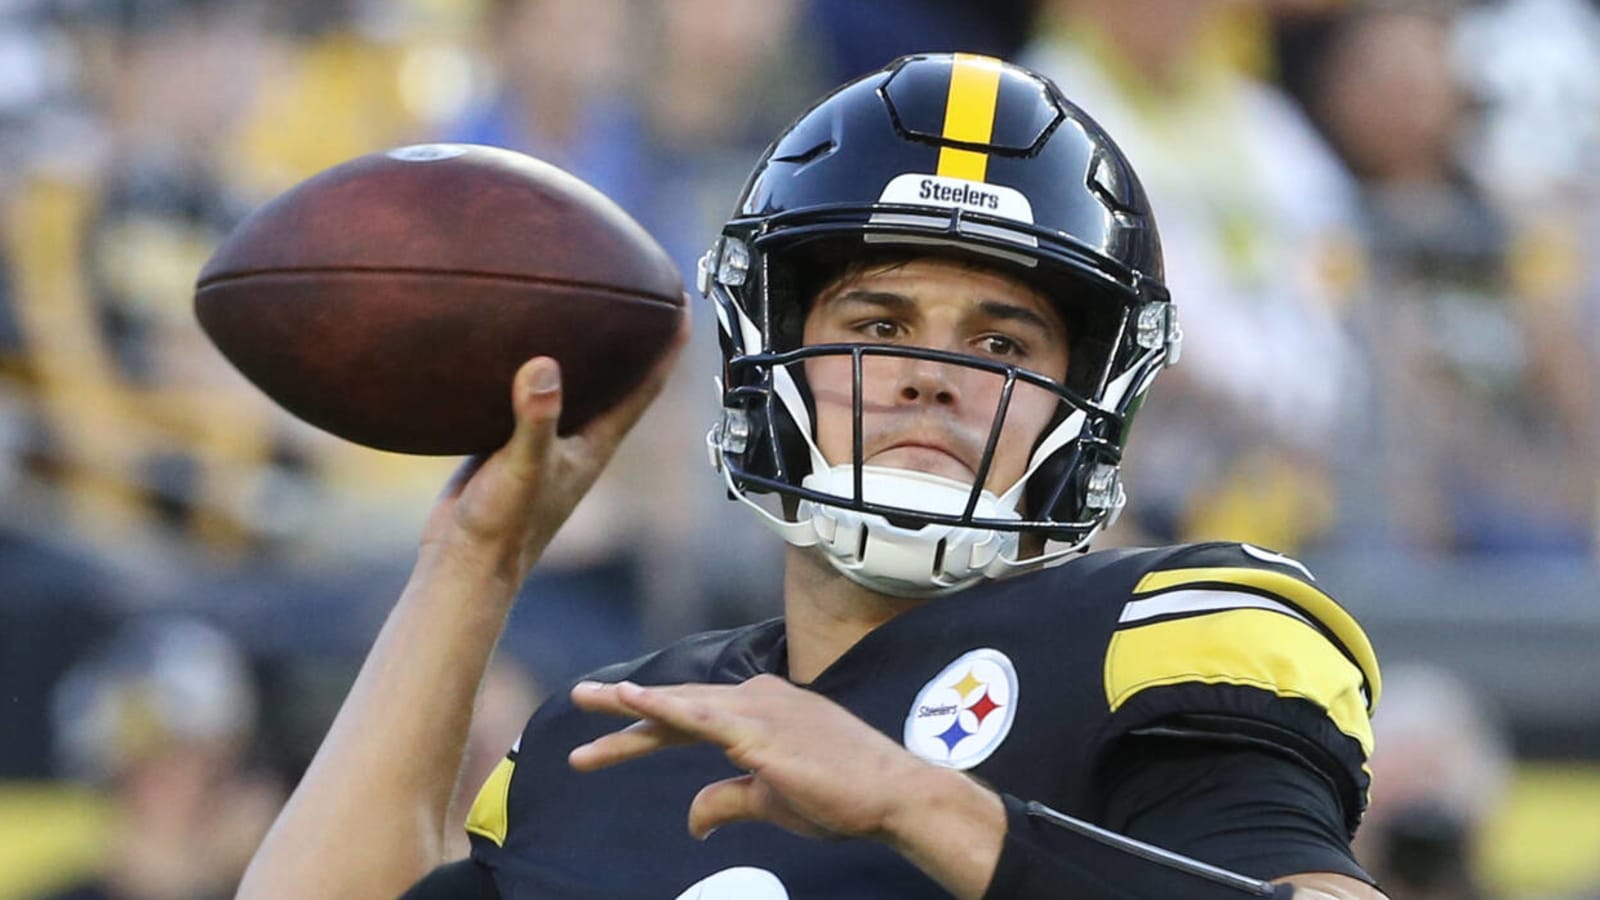 Steelers expected to re-sign QB Mason Rudolph, sources say - ESPN